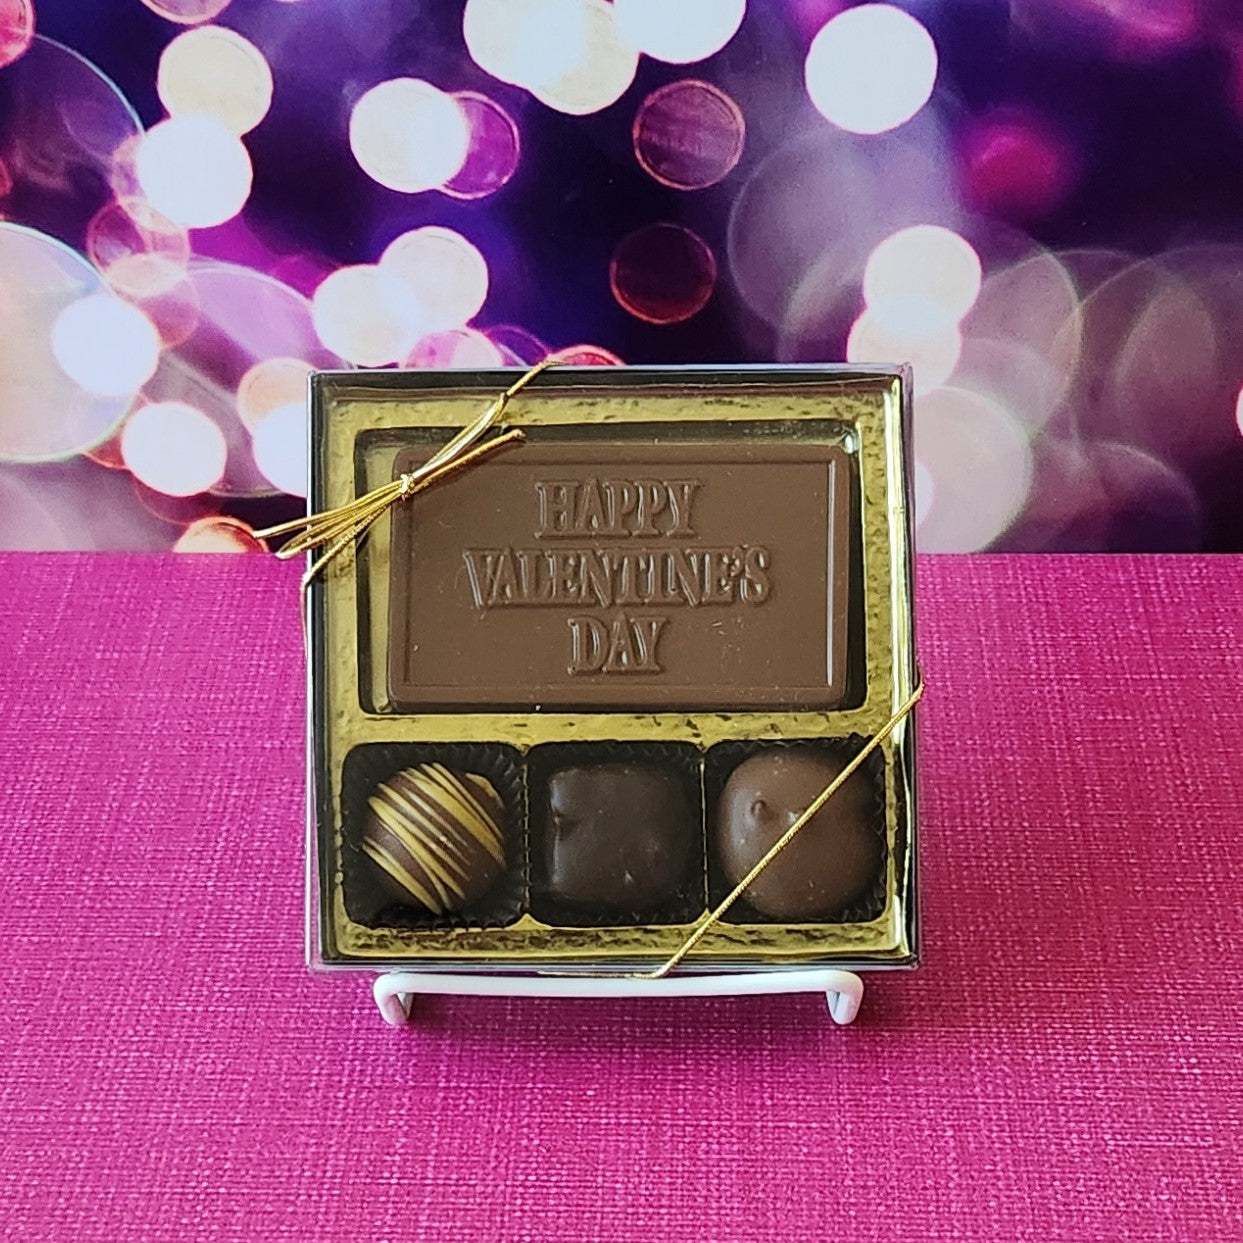 A small box of chocolates makes the perfect thinking of you gift for Valentine's Day.